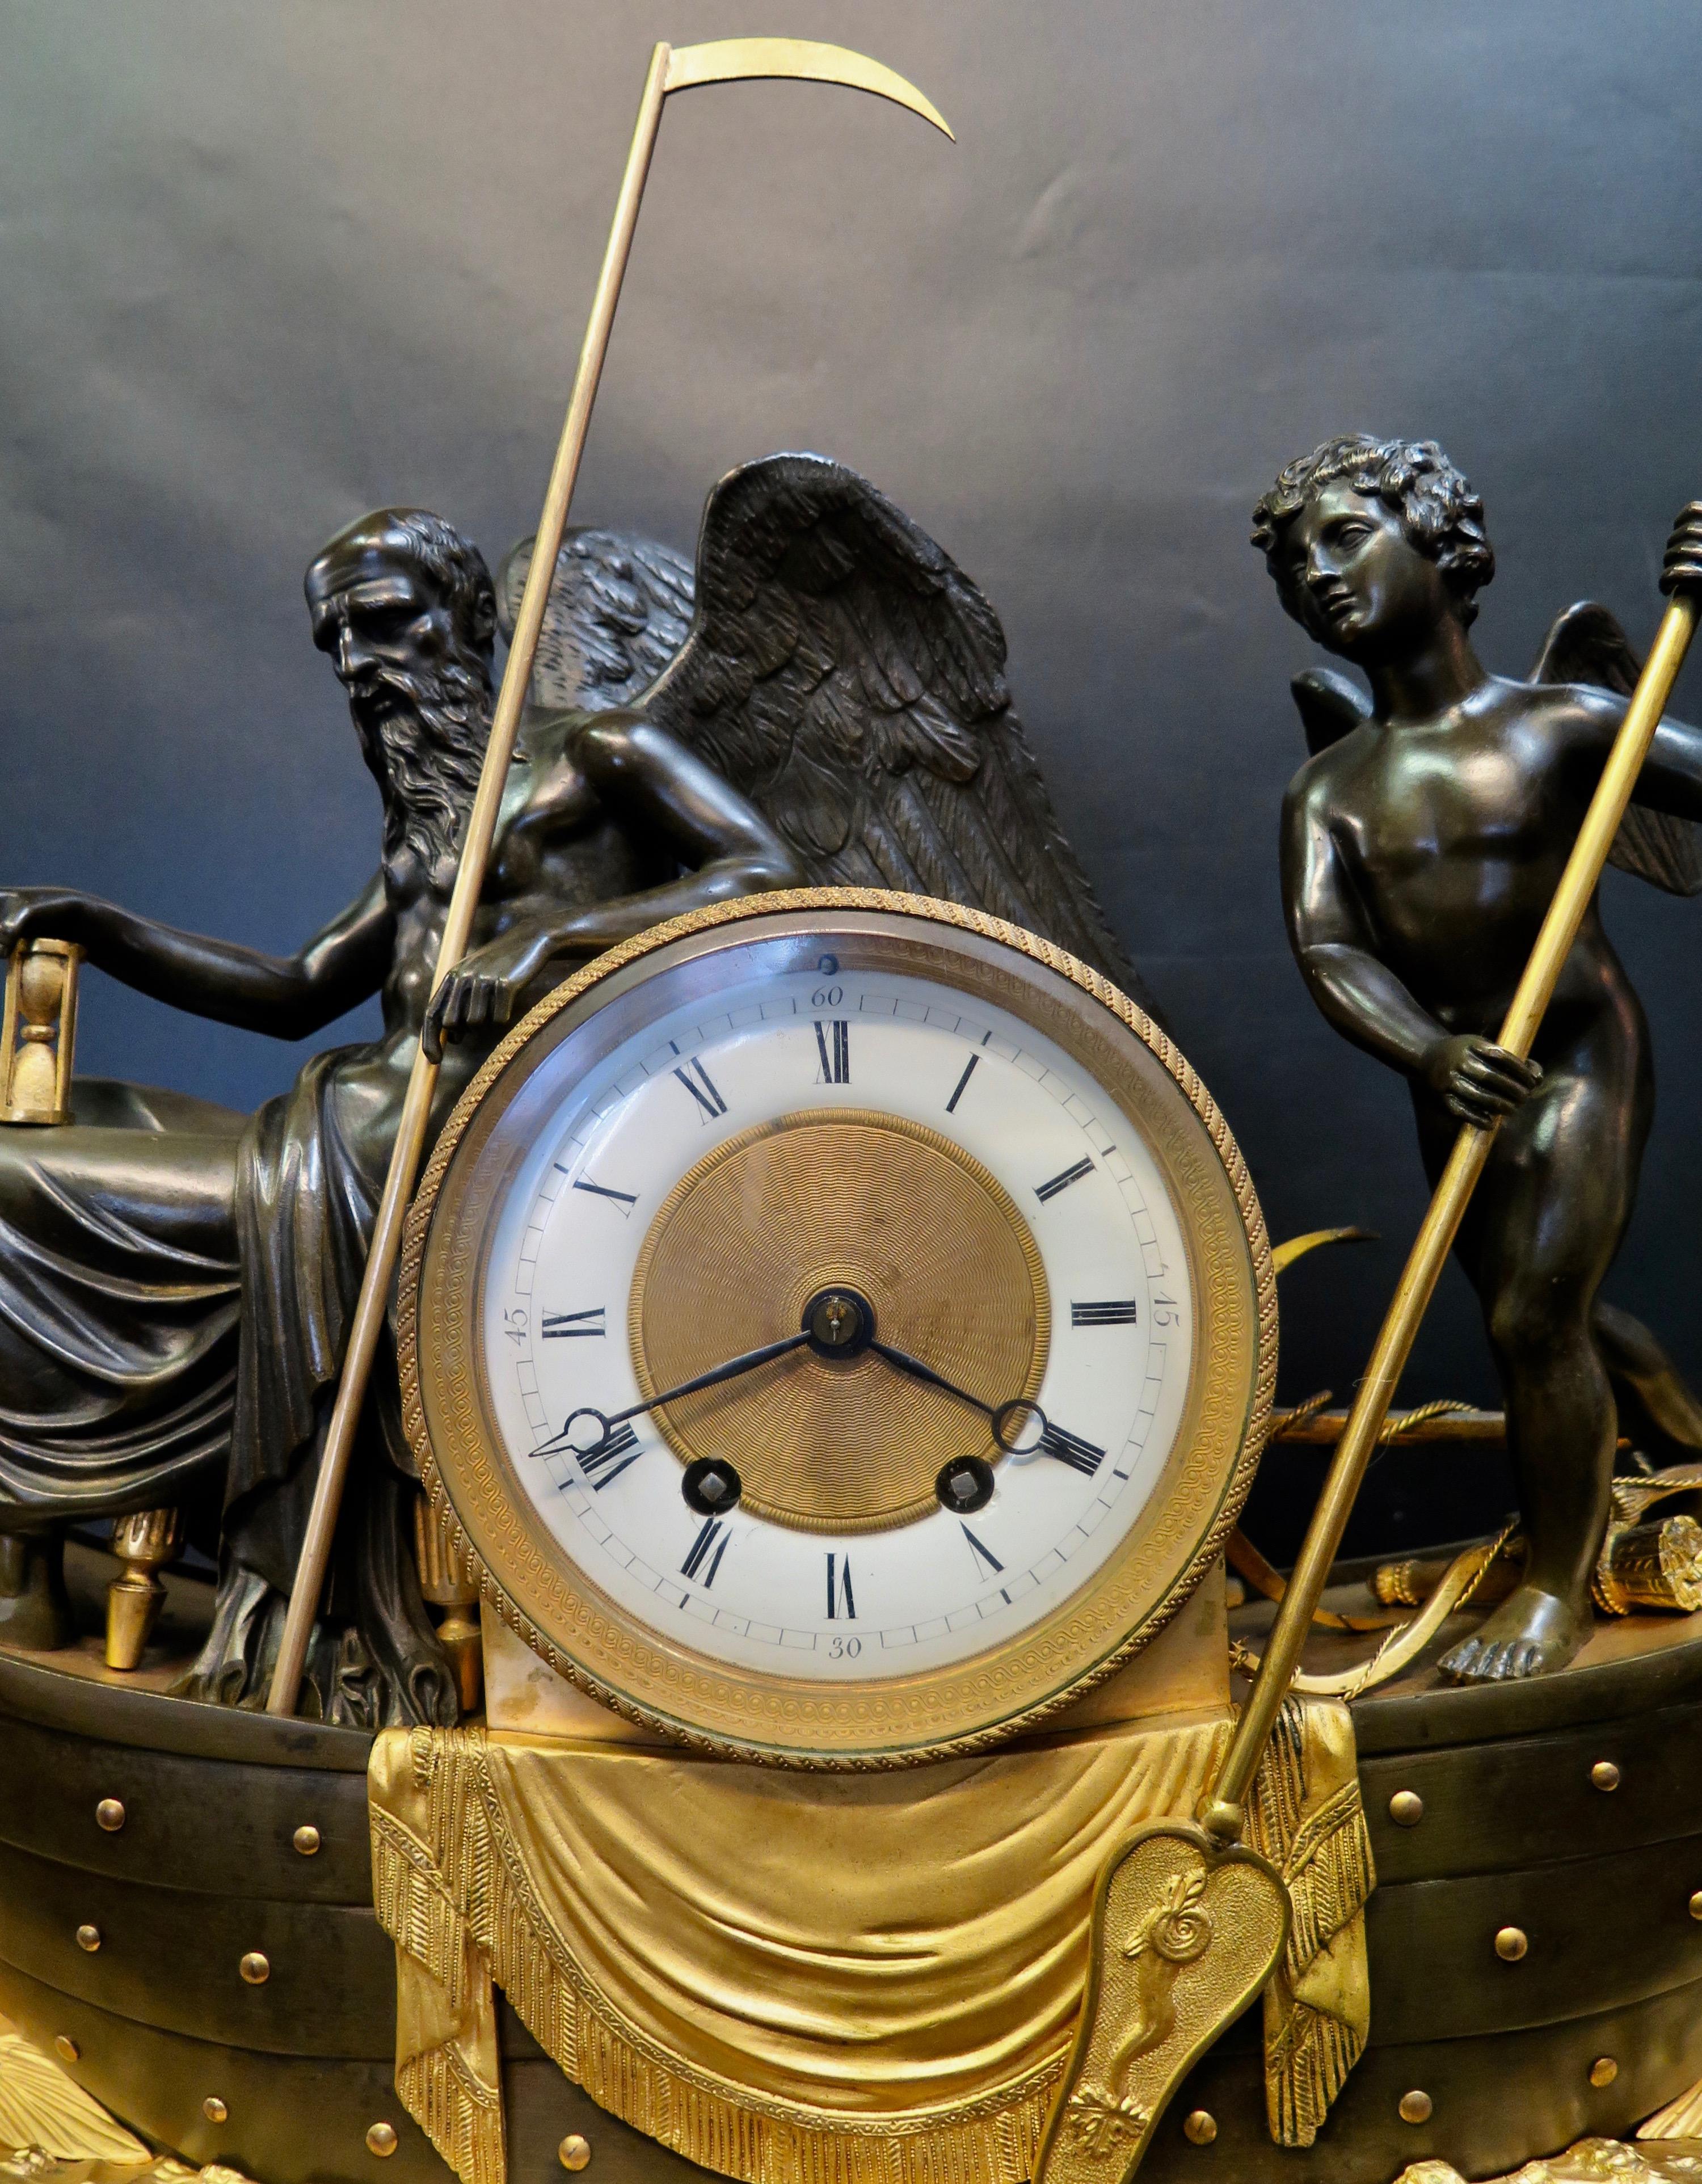 This vintage sculpted bronze and marble clock dates from the mid-19th century (Empire Period). It is elaborately decorated with an exceptional depiction of 